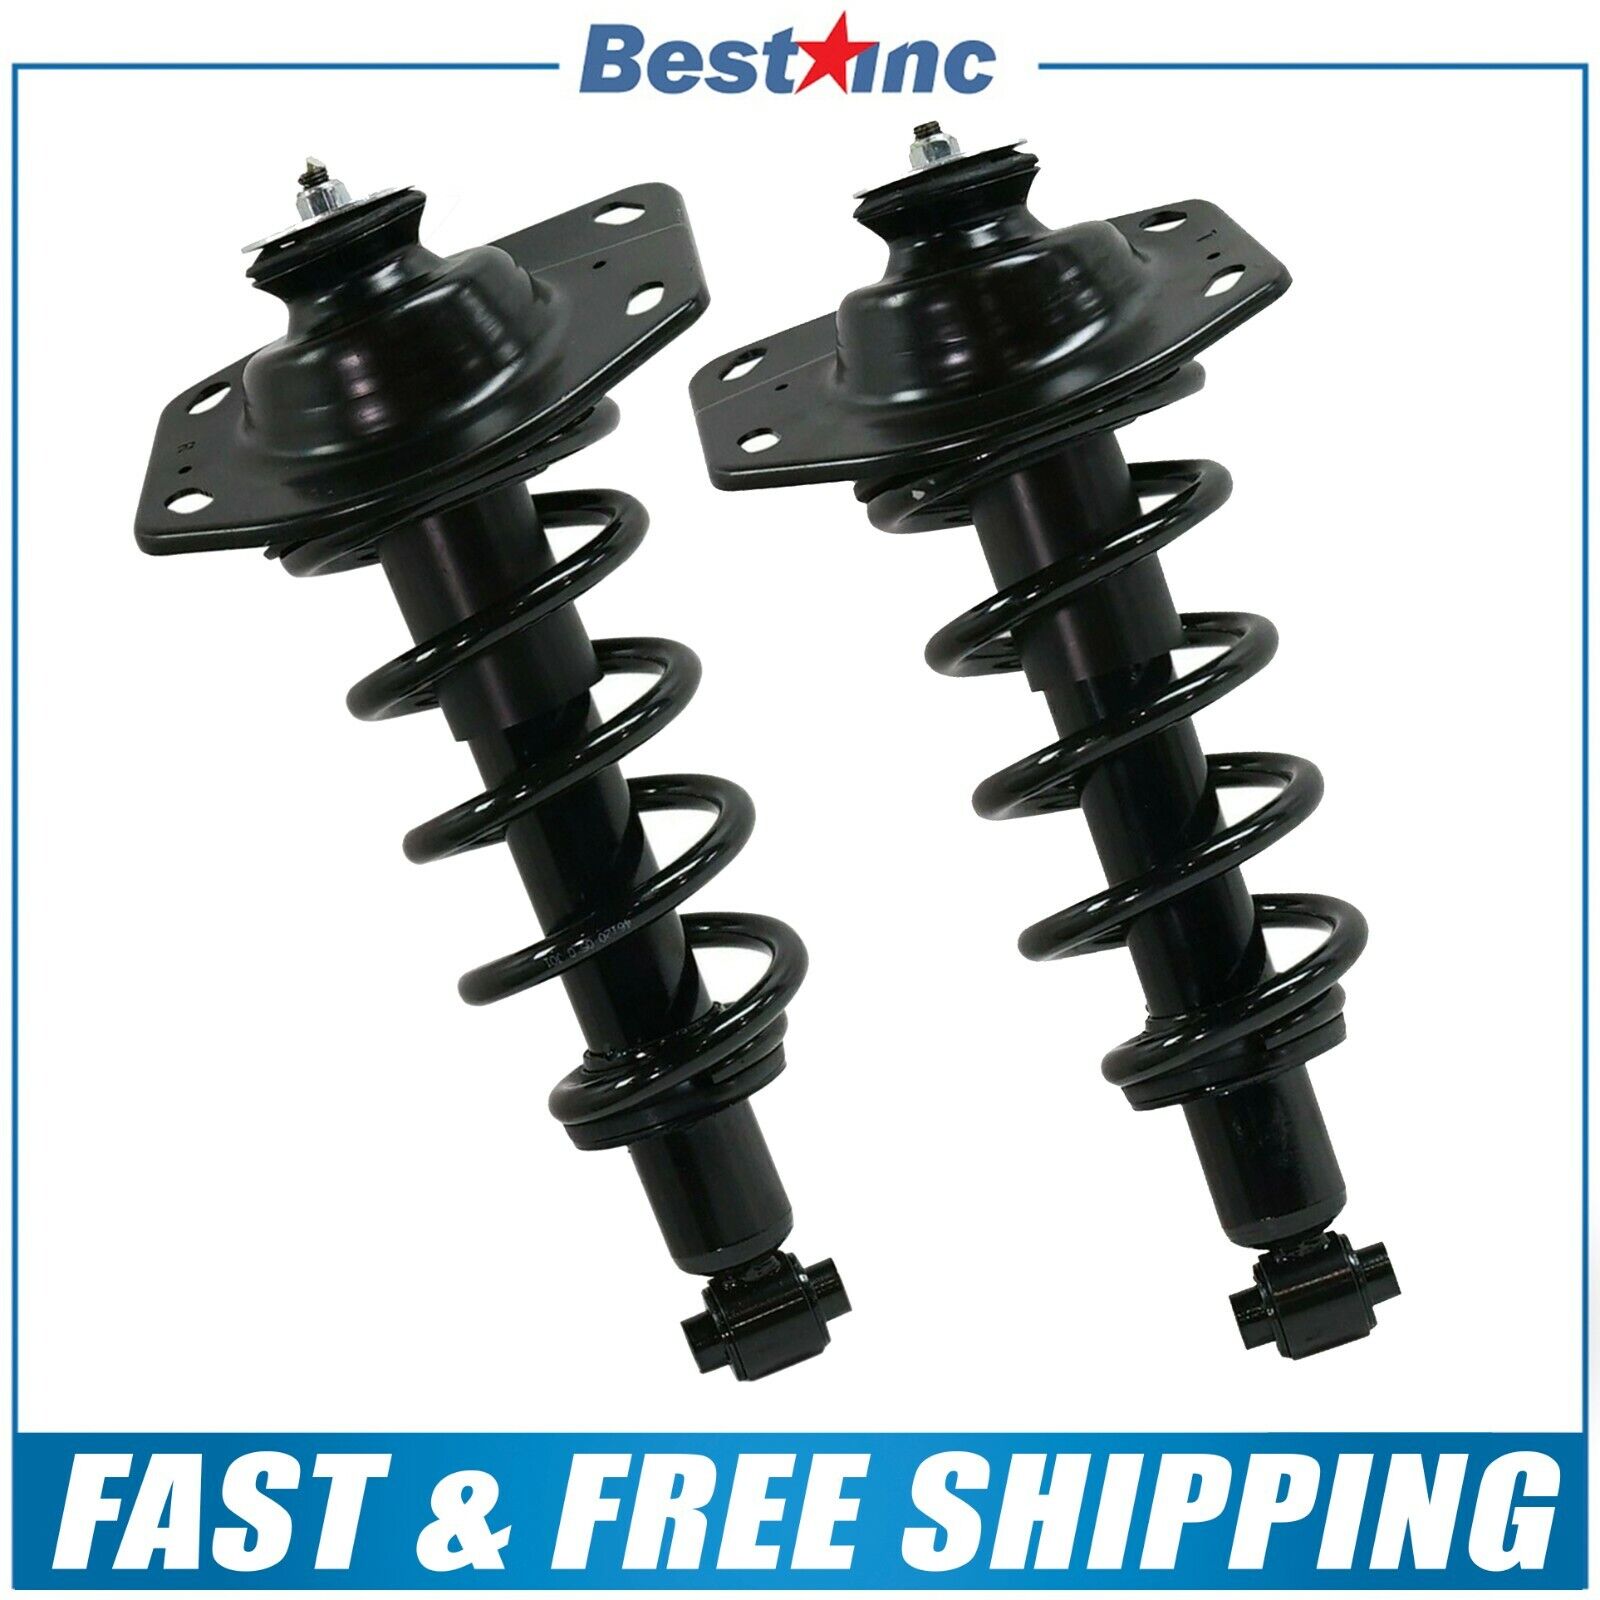 Rear Pair (2) Complete Struts Assembly for 2010 2011 2012- 2015 Chevrolet Camaro